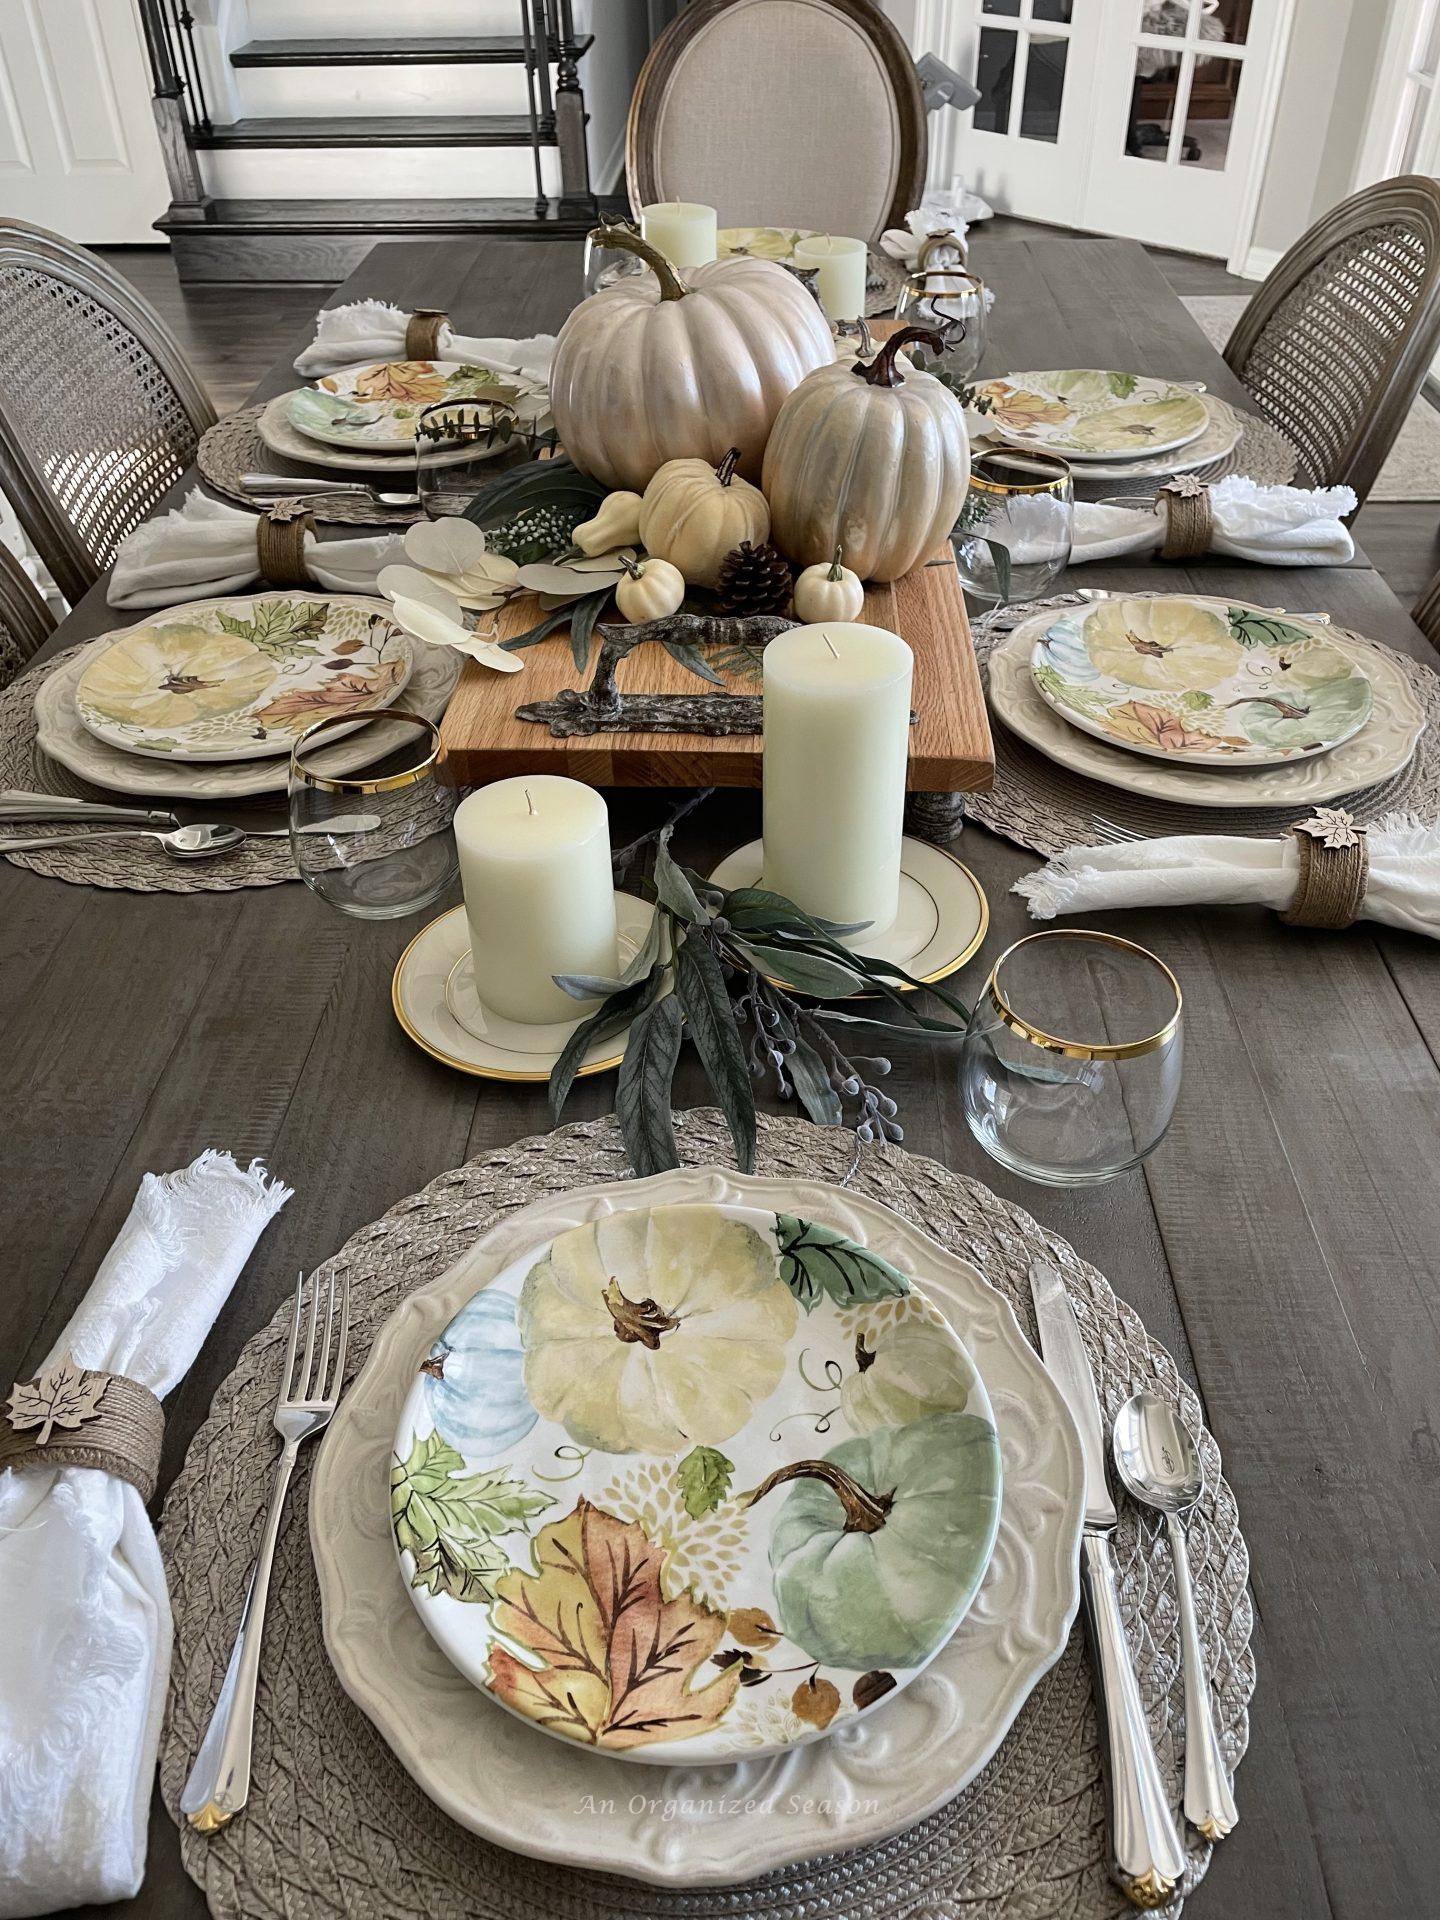 Plan Now for the Best Thanksgiving Ever - An Organized Season